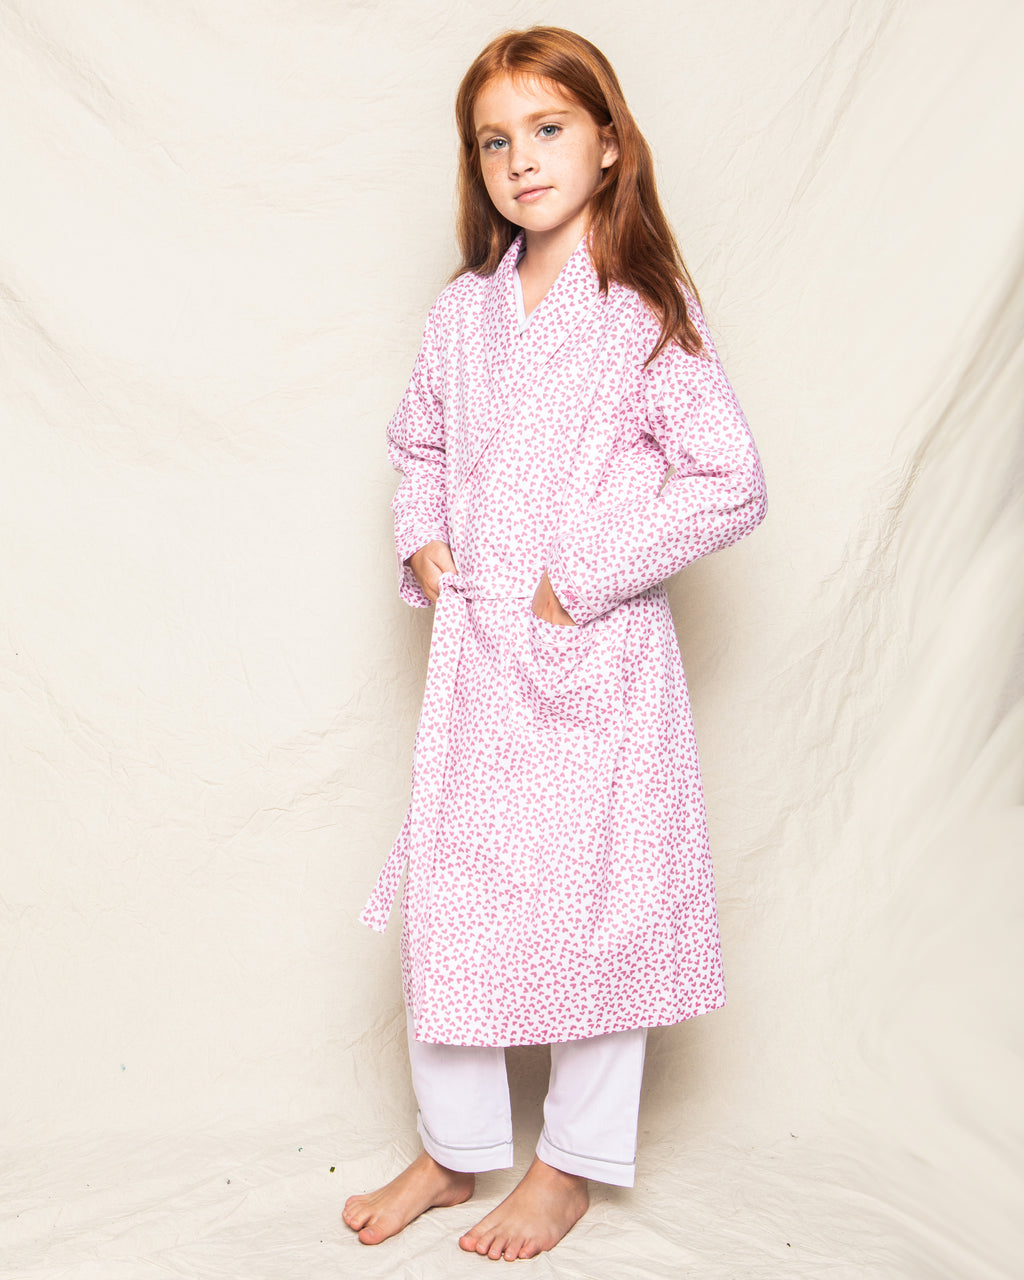 ROBE PETITE FILLE ROSE EVE CHILDREN. Robes petite fille online Automne Hiver